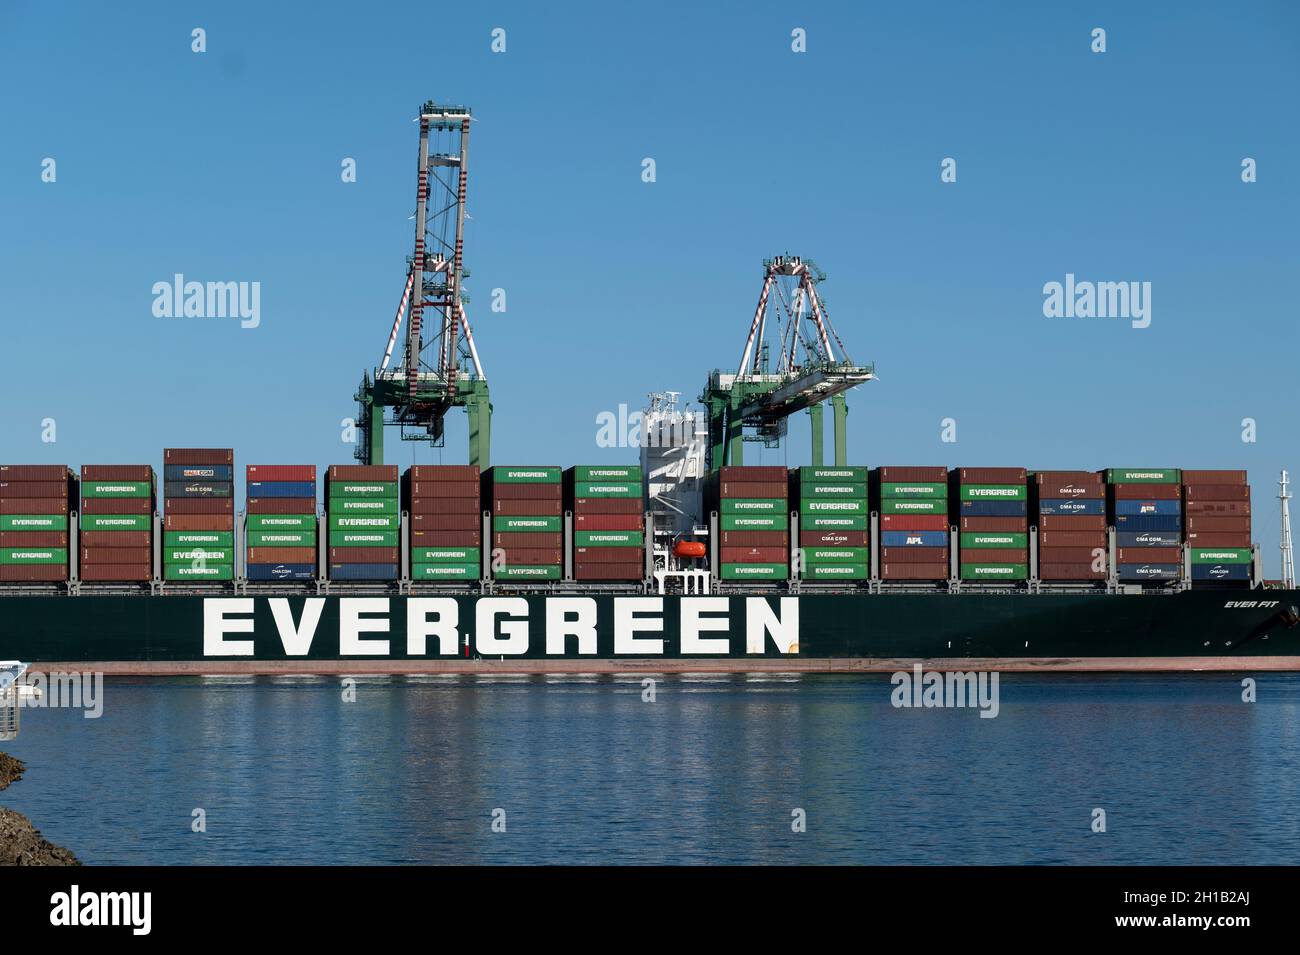 Los Angeles, CA USA - July 16, 2021: Shipping containers stacked at the Port of Los Angeles during supply chain disruption Stock Photo